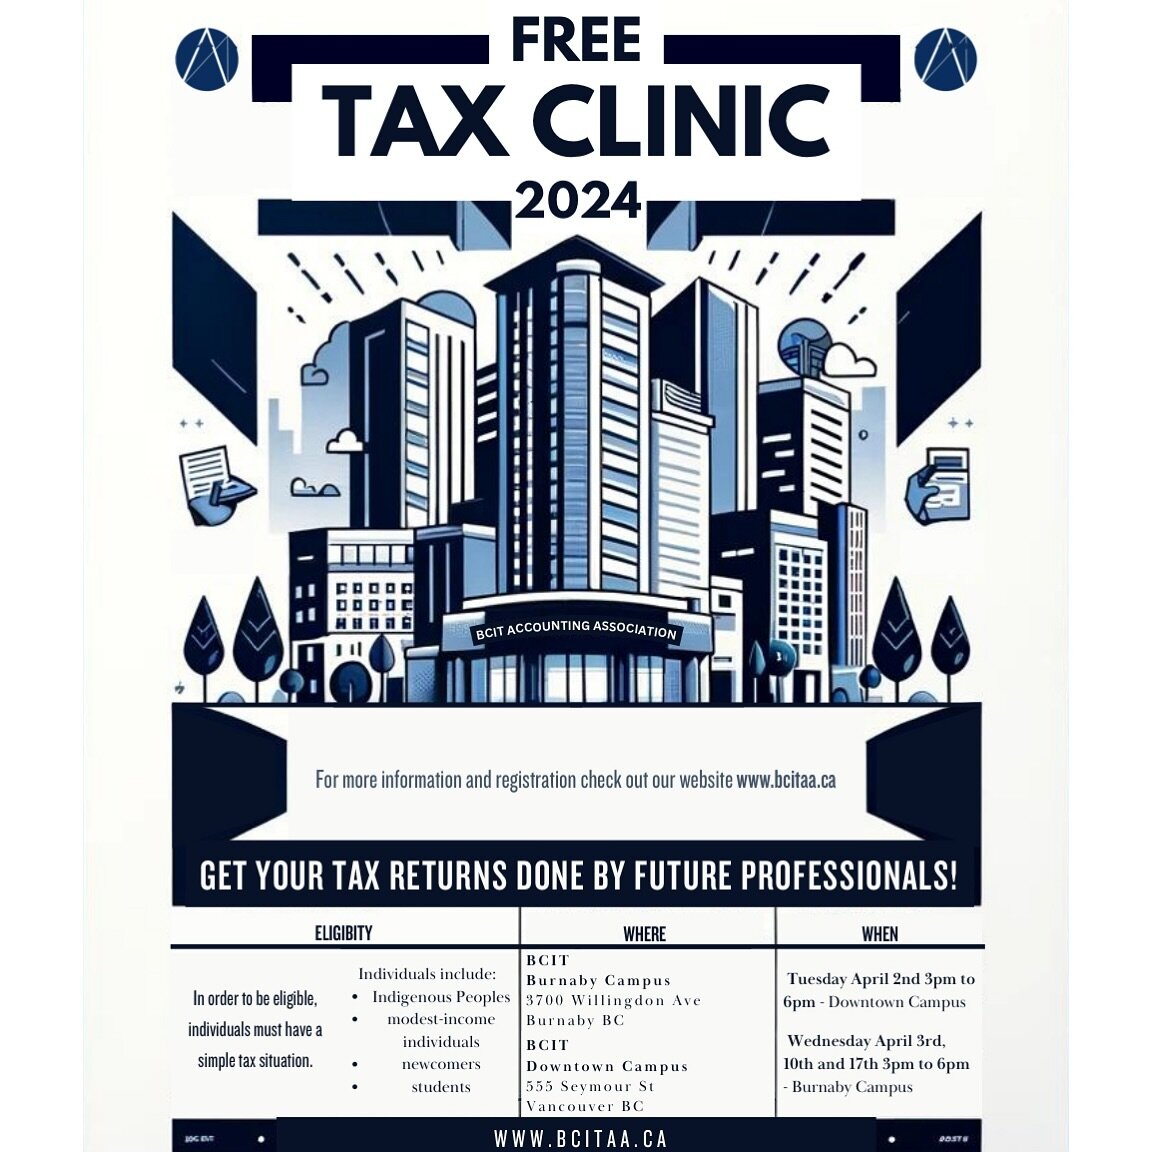 Have you filed your taxes yet? 

Book an appointment with us today and get your tax return done by future professionals! Bookings are now open for the month of April. 

𝙀𝙡𝙞𝙜𝙞𝙗𝙡𝙚 𝙞𝙣𝙘𝙤𝙢𝙚:
Income for single person under $35,000
Combined in